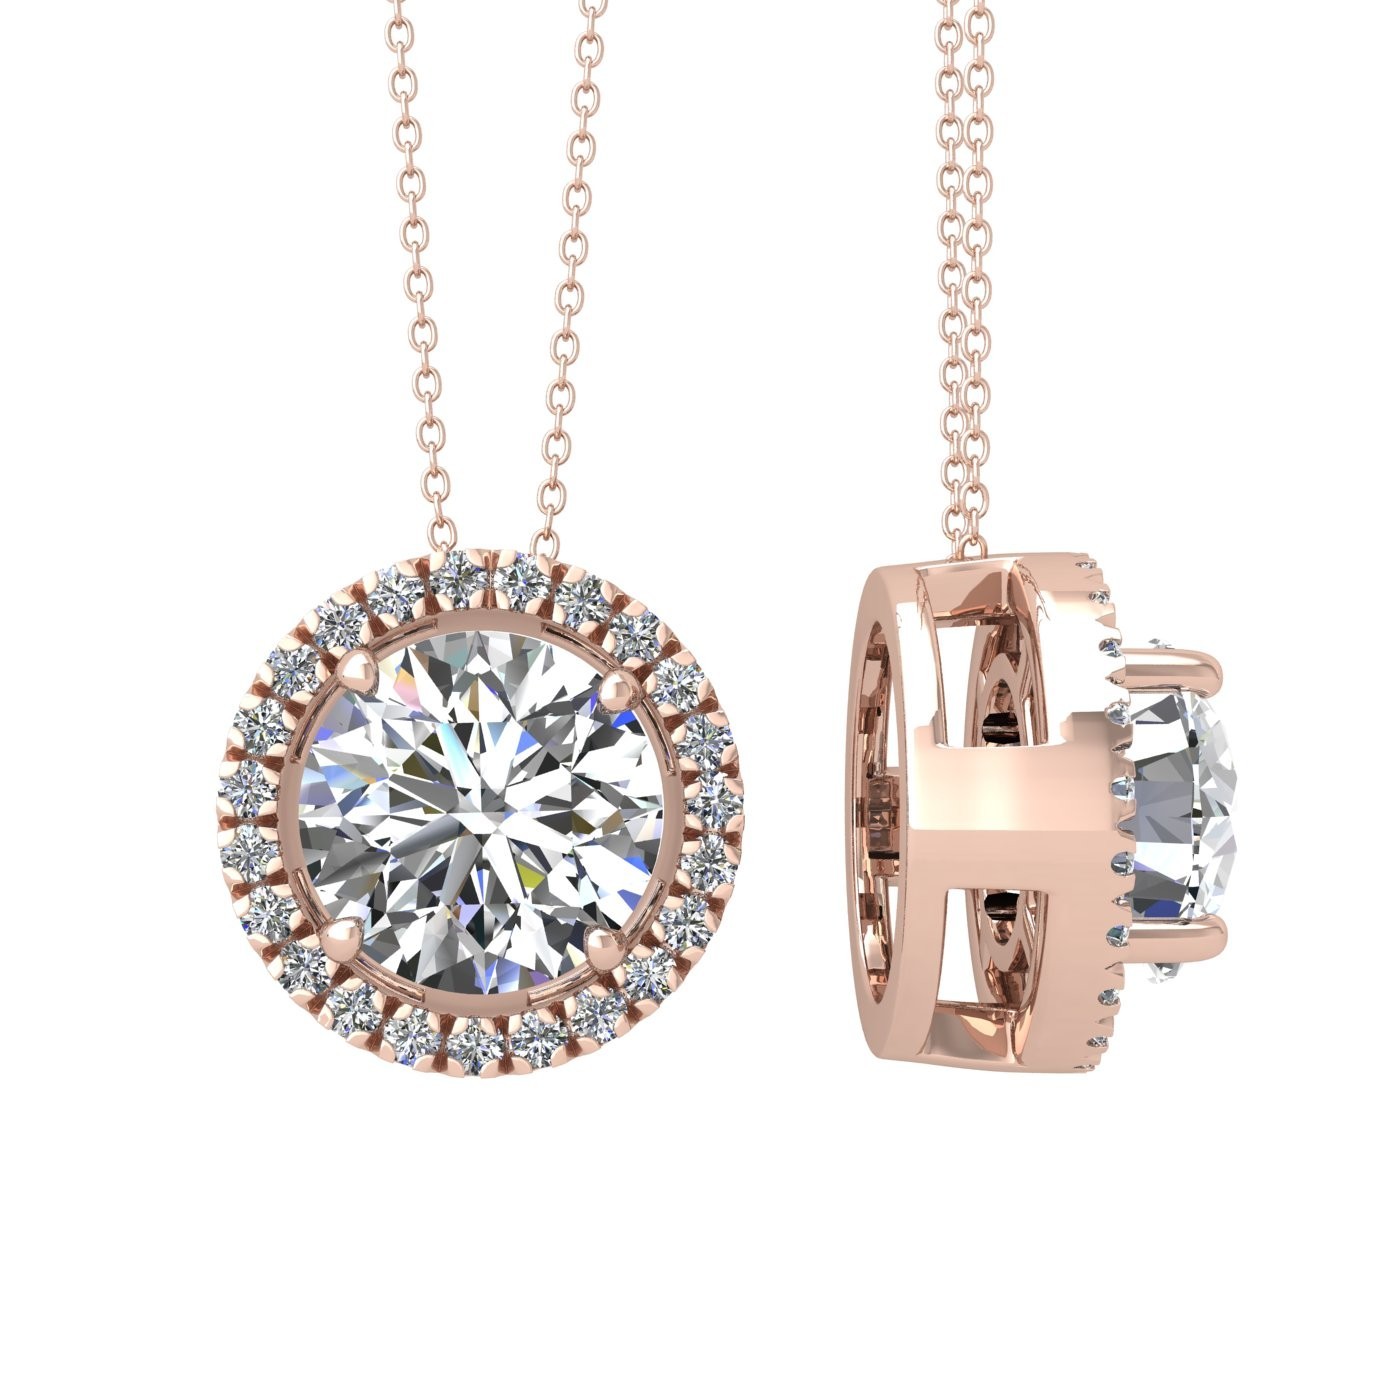 18k rose gold 1 ct 4 prong round shape diamond pendant with diamond pavÉ set halo including chain seperate from the pendant